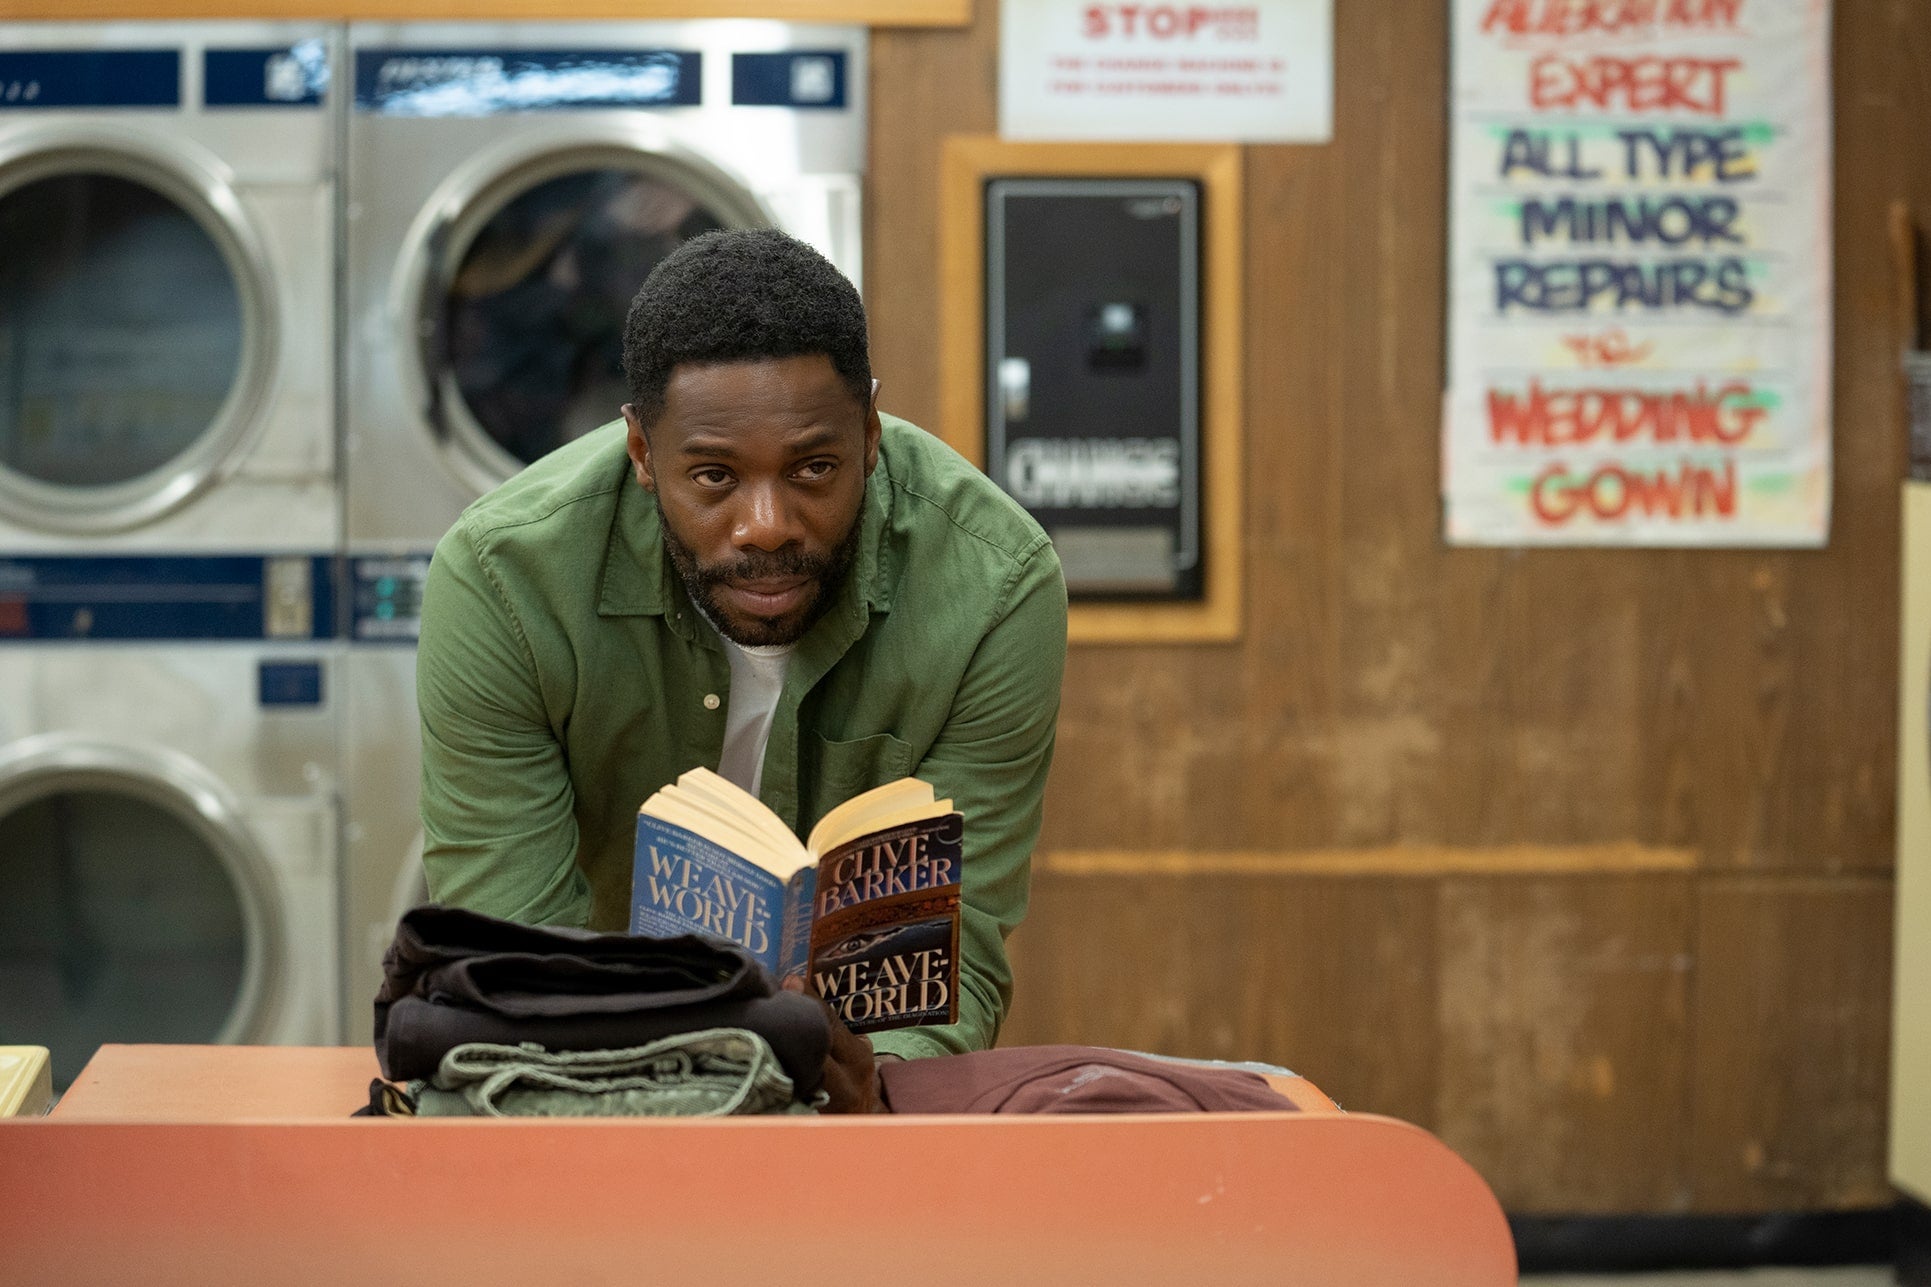 In a laundromat, Colman Domingo reads Clive Barker's Weave World.